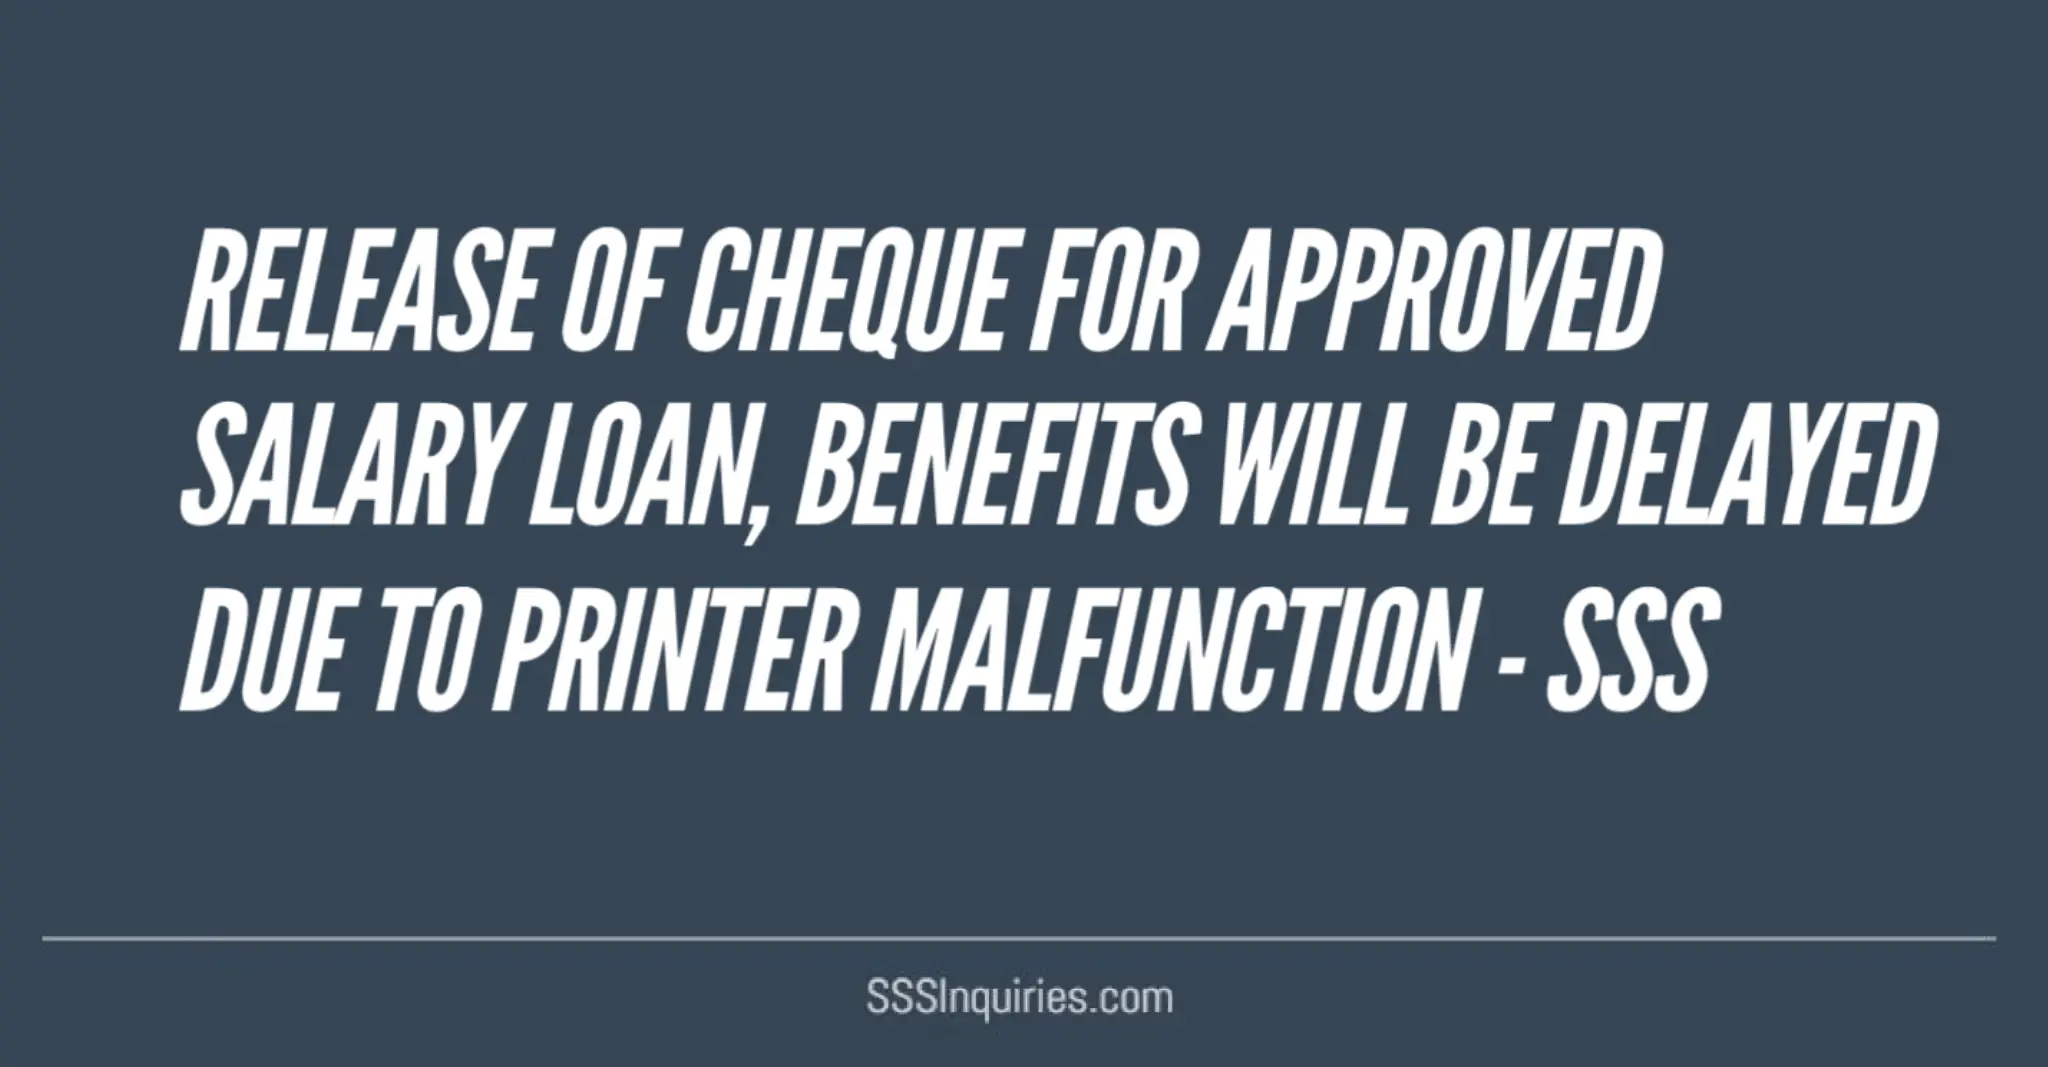 RELEASE OF CHEQUE FOR APPROVED SALARY LOAN, BENEFITS WILL BE DELAYED DUE TO PRINTER MALFUNCTION